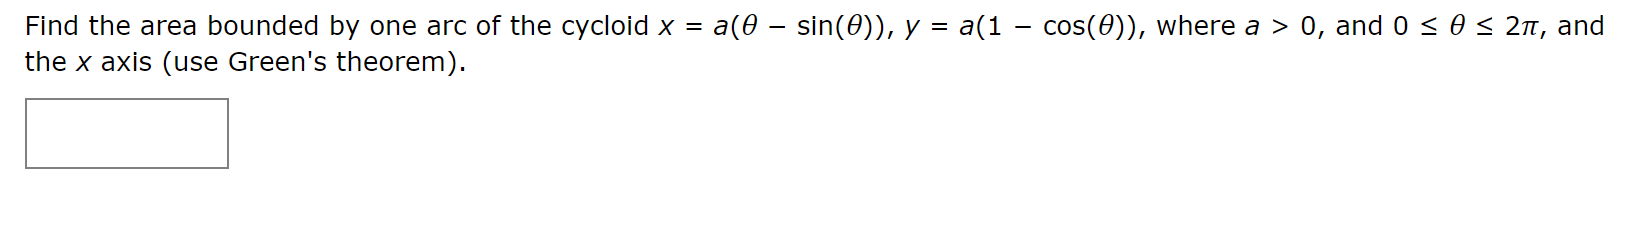 a(0 - sin(0)), y = a(1 – cos(0)), where a > 0, and 0 < 0 < 2n, and
Find the area bounded by one arc of the cycloid x =
the x axis (use Green's theorem).
